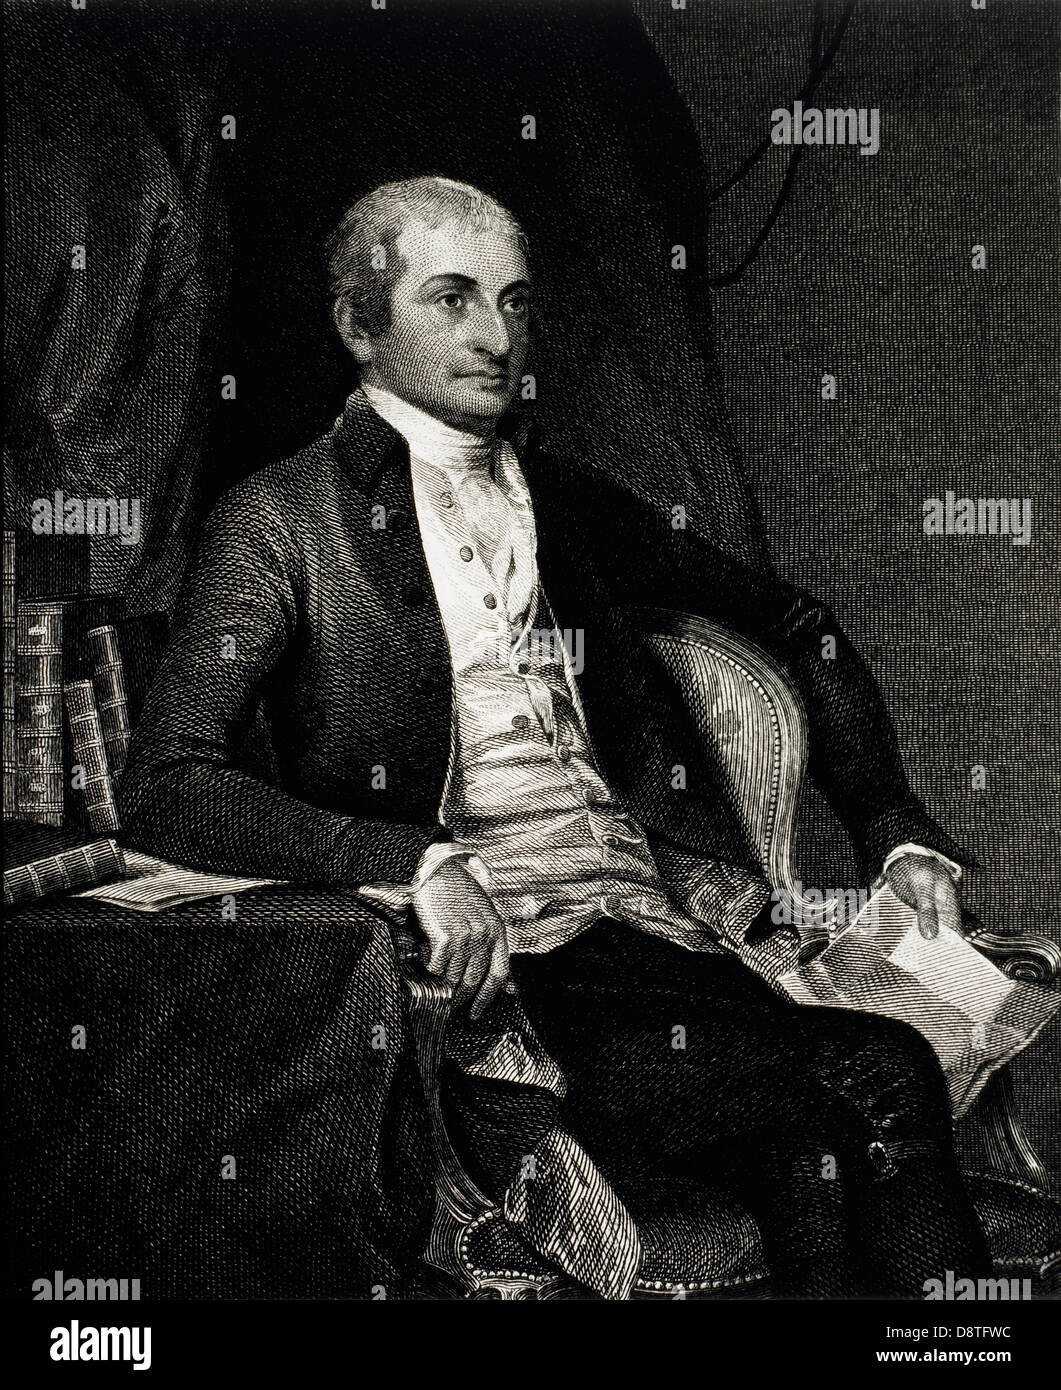 John Jay (1745-1829), American Statesman, First Chief Justice of the USA, Engraving Published 1859 Stock Photo